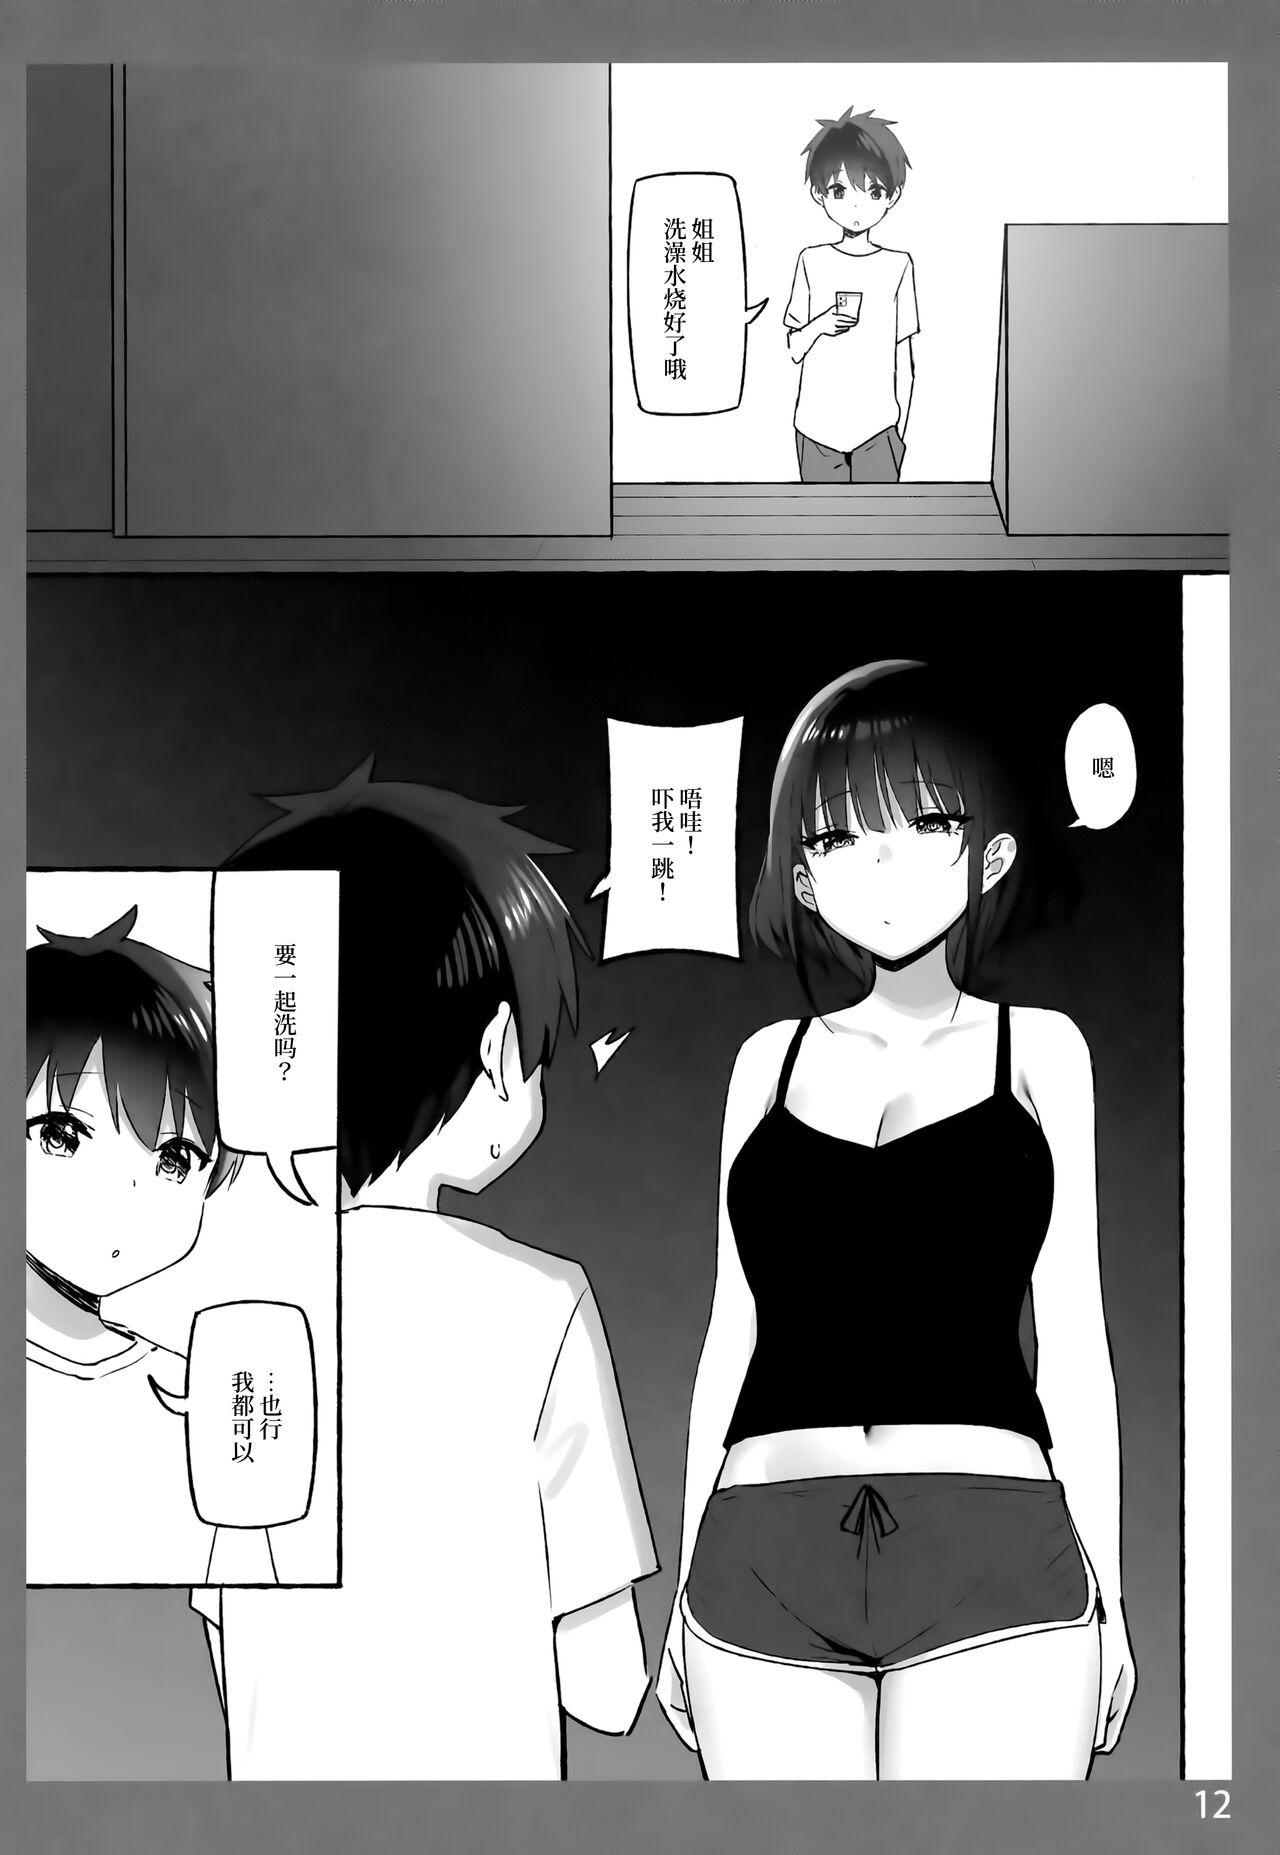 Passionate [Candy Club (Sky)] Onee-chan to Torokeru Kimochi SP | The Melting Feeling with Onee-chan SP [Chinese] [白杨汉化组] - Original Boobies - Page 11